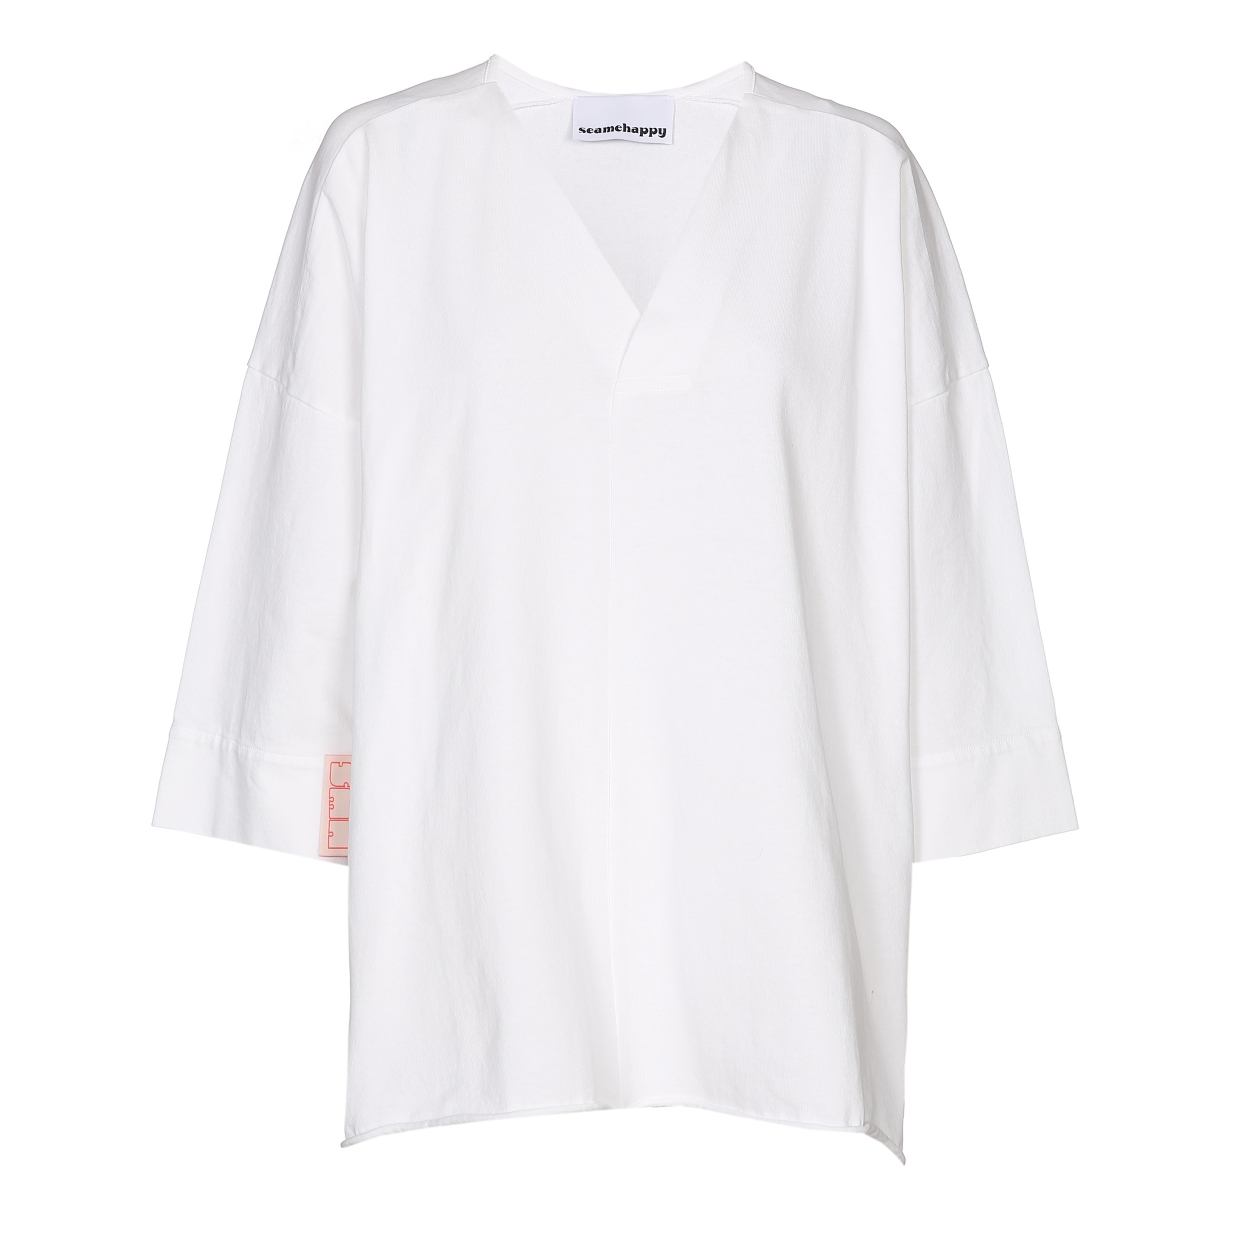 https://www.seamehappy.be/wp-content/uploads/2023/01/Sea-Me-Happy-Charly-blouse-jersey-white.jpg